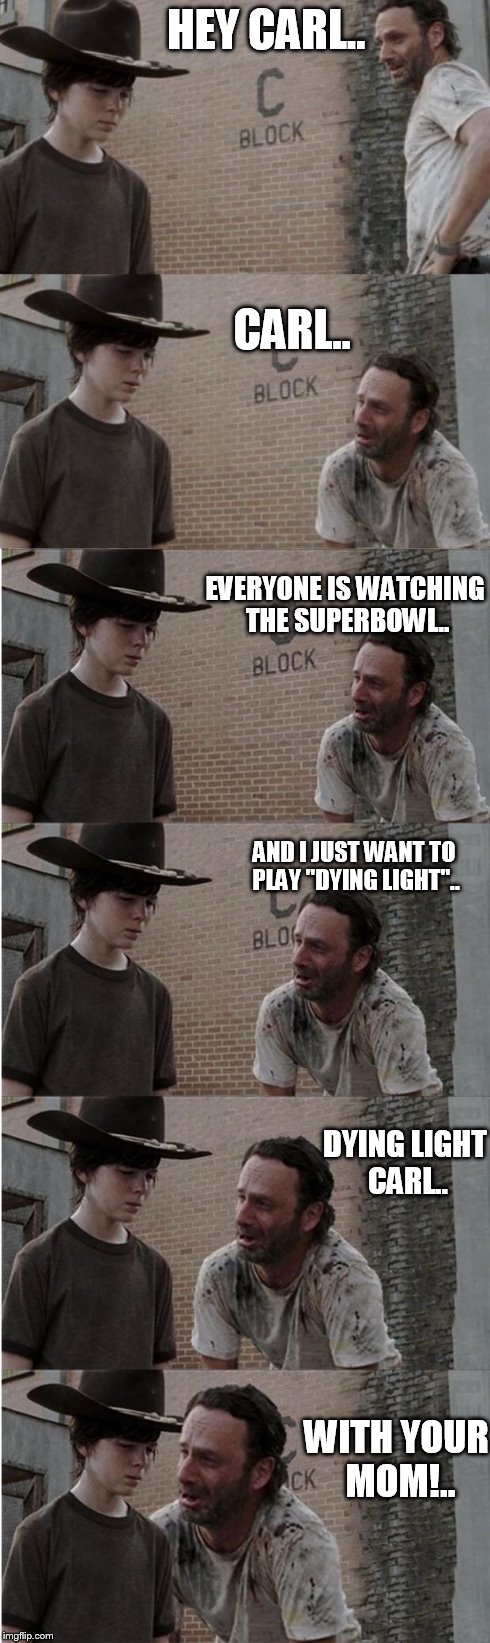 Rick and Carl Longer Meme | HEY CARL.. WITH YOUR MOM!.. CARL.. EVERYONE IS WATCHING THE SUPERBOWL.. AND I JUST WANT TO PLAY "DYING LIGHT".. DYING LIGHT CARL.. | image tagged in memes,rick and carl longer | made w/ Imgflip meme maker